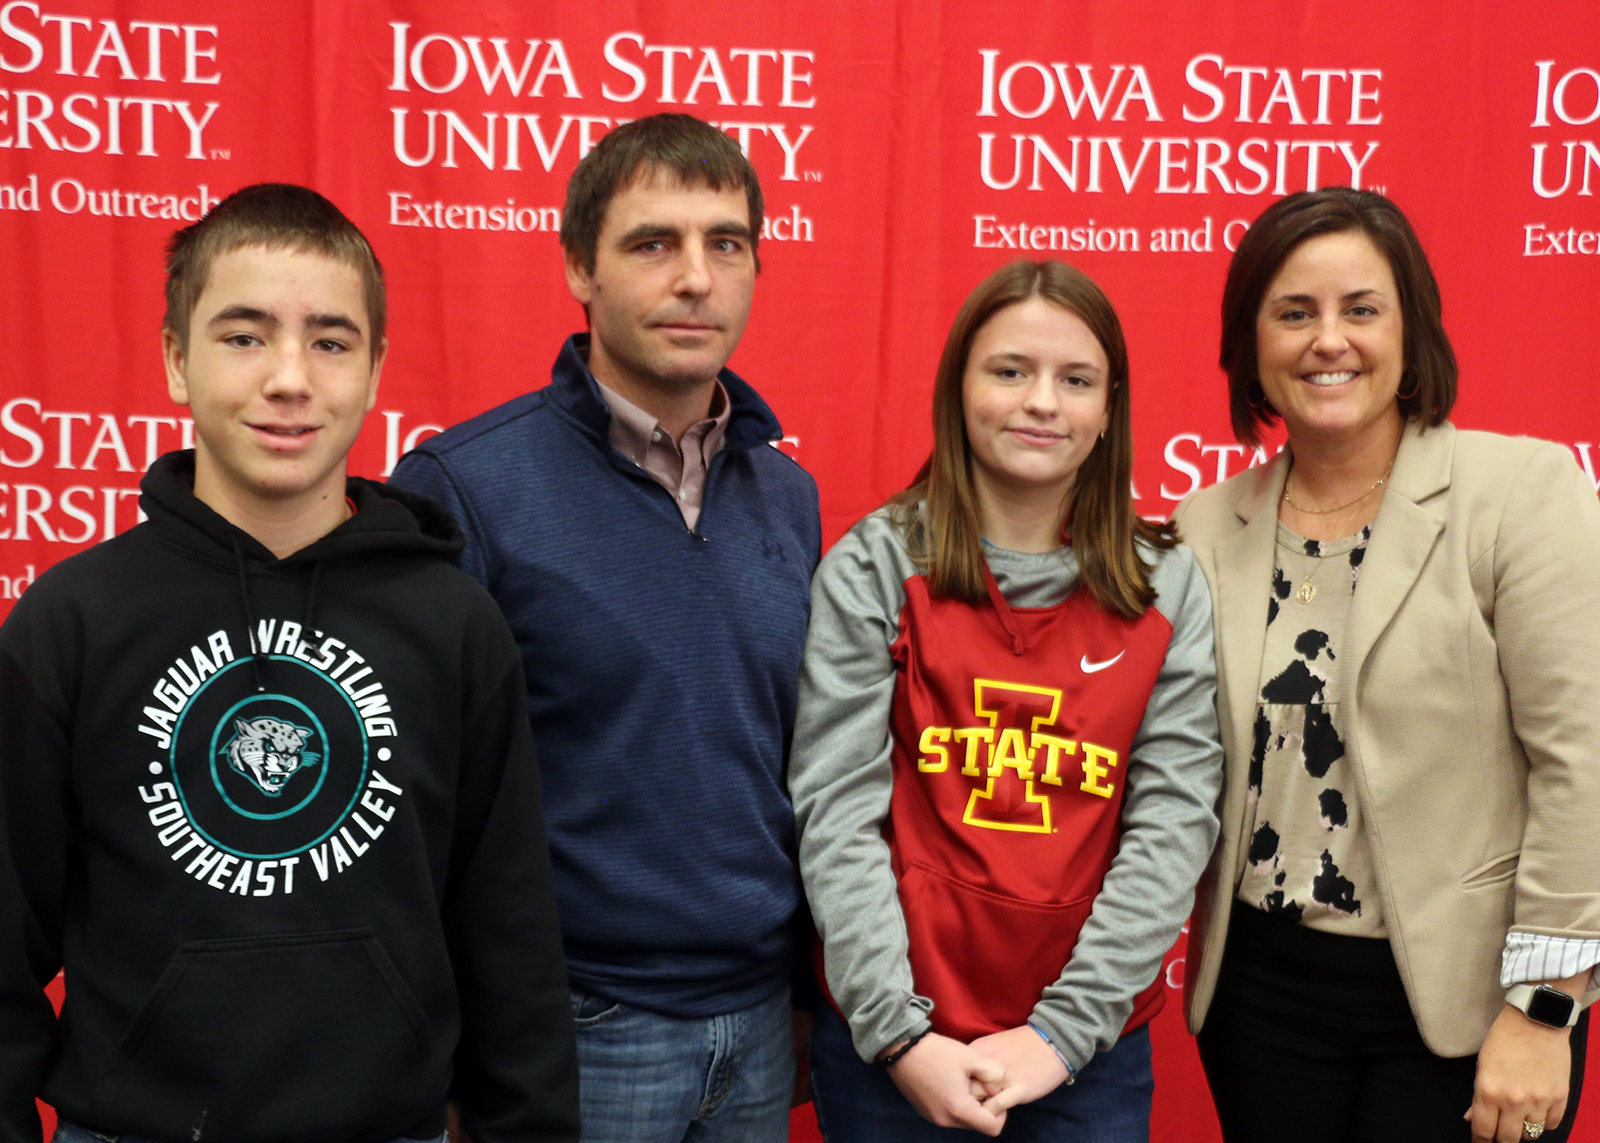 Kellie Blair smiles with her two children and husband in front of an Iowa State University banner back-drop.